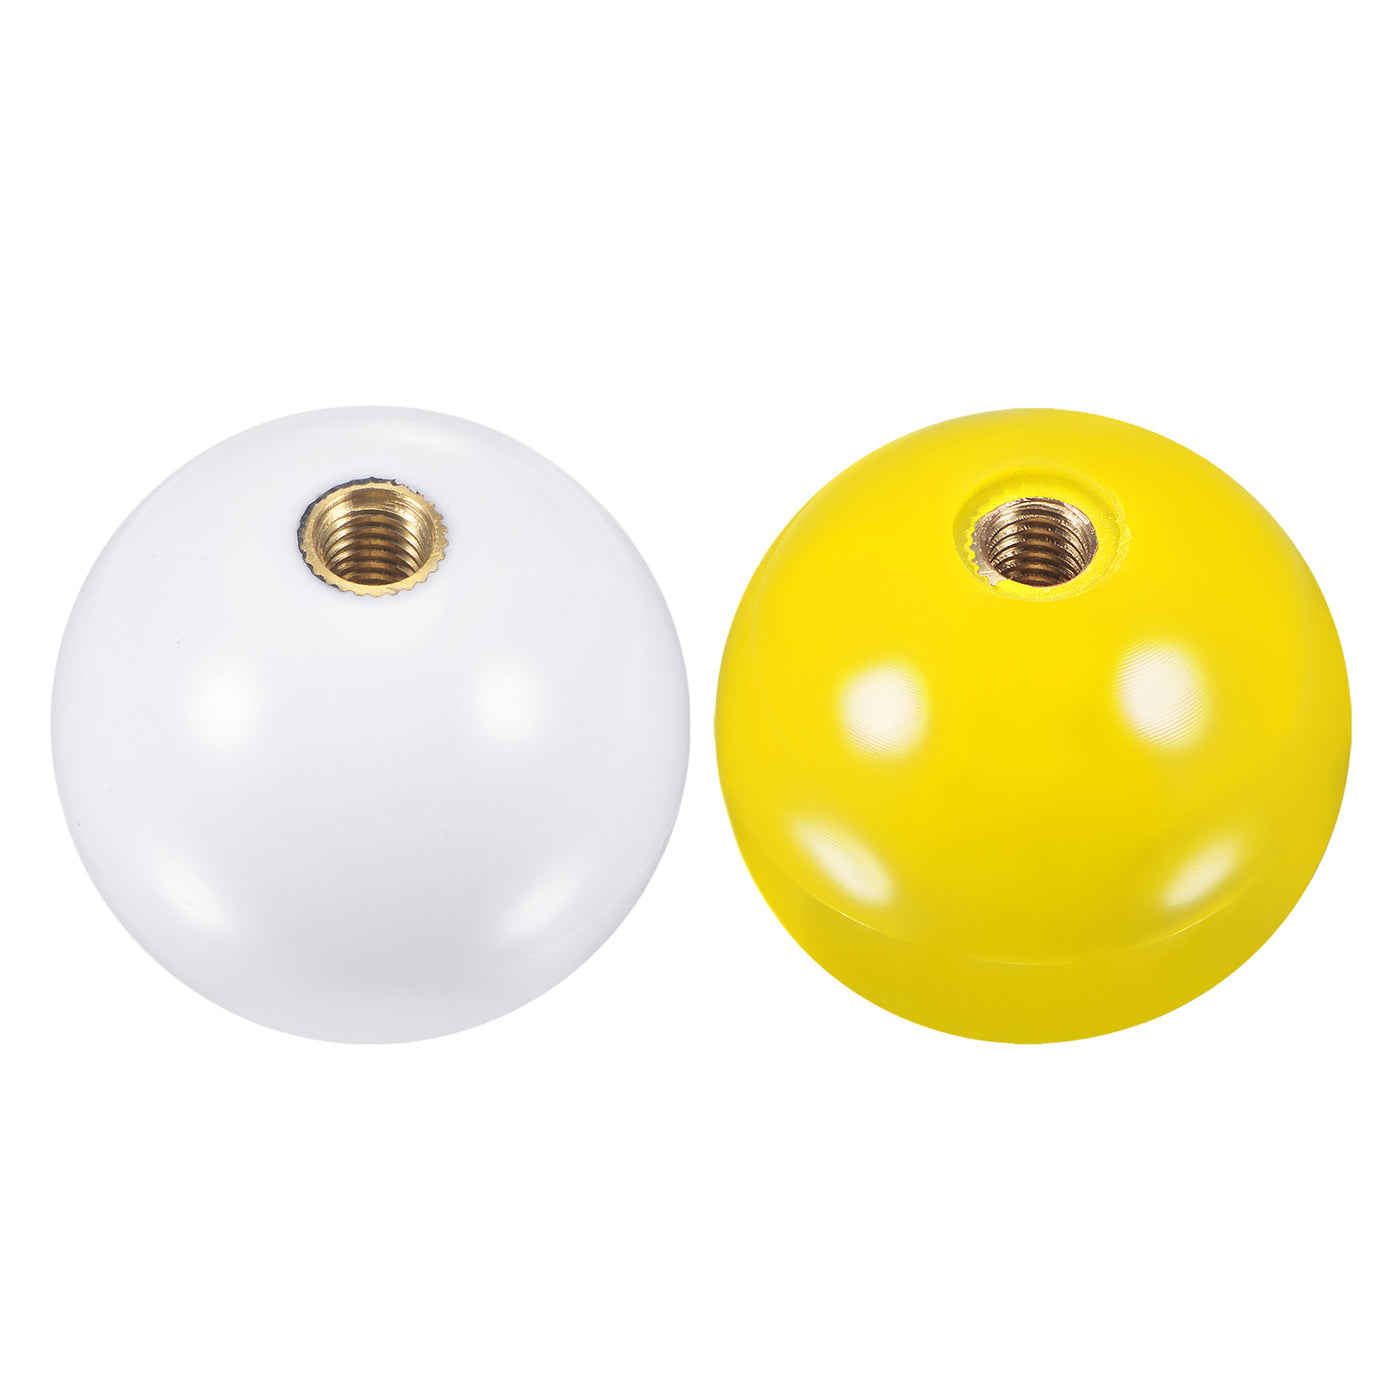 uxcell Uxcell Joystick Head Rocker Ball Top Handle Arcade Game Replacement White/Yellow